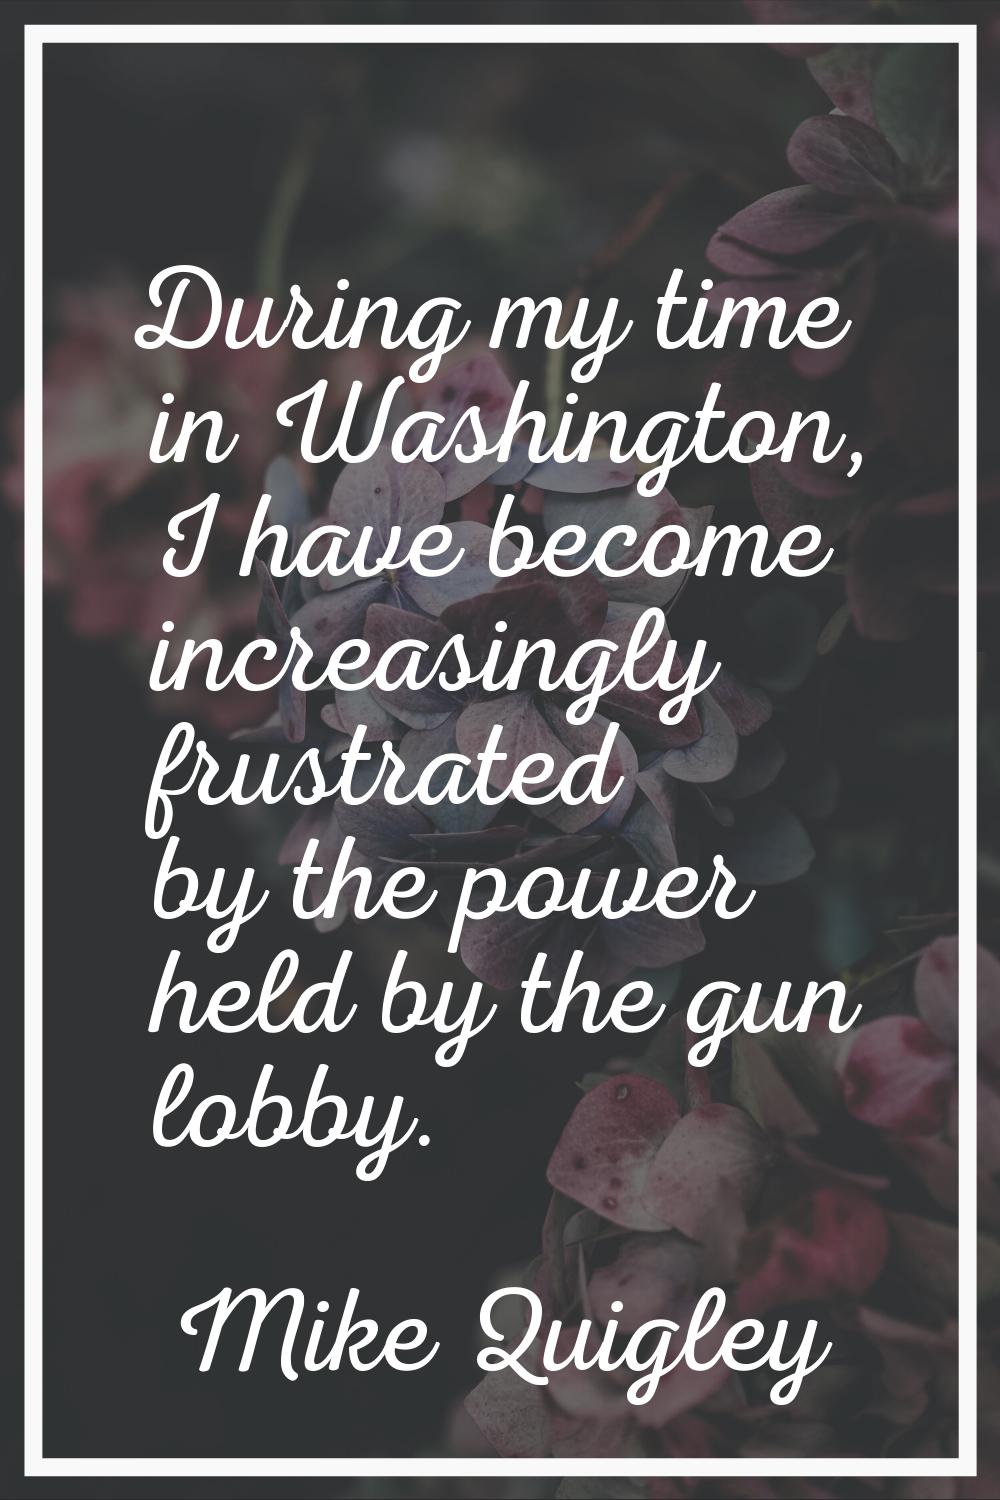 During my time in Washington, I have become increasingly frustrated by the power held by the gun lo